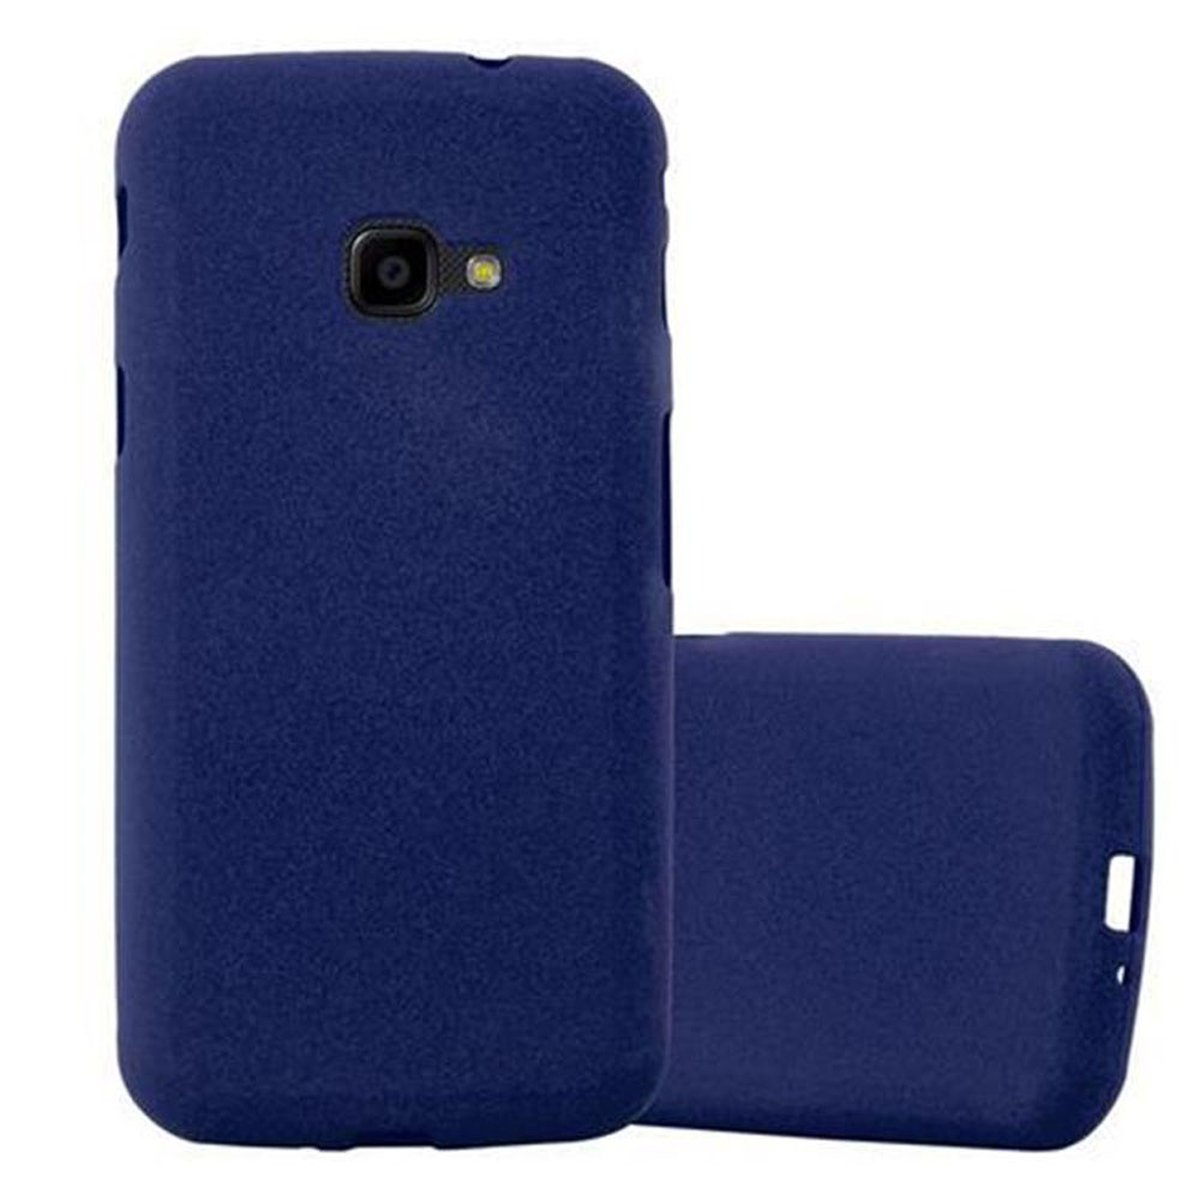 DUNKEL CADORABO XCover FROST XCover Galaxy 4s, Frosted / Samsung, 4 Backcover, Schutzhülle, TPU BLAU